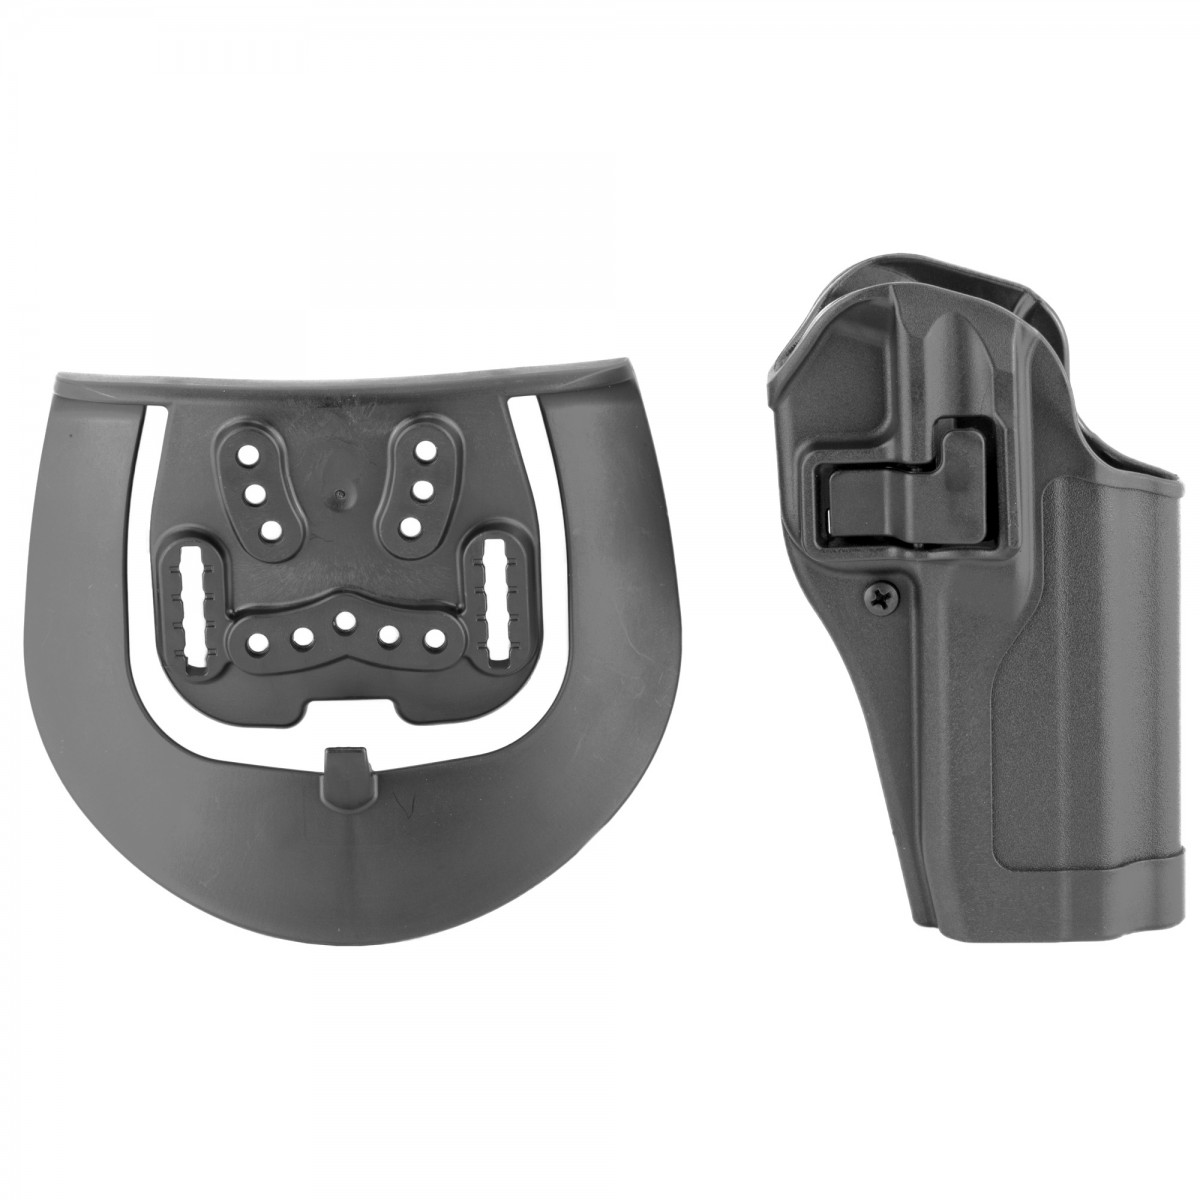 https://gunmagwarehouse.com/media/catalog/product/cache/1/image/1200x1200/9df78eab33525d08d6e5fb8d27136e95/b/l/blackhawk-cqc-serpa-holster-with-belt-and-paddle-attachment-fits-fn-fns-9-40-full-size-and-compact-1.jpg